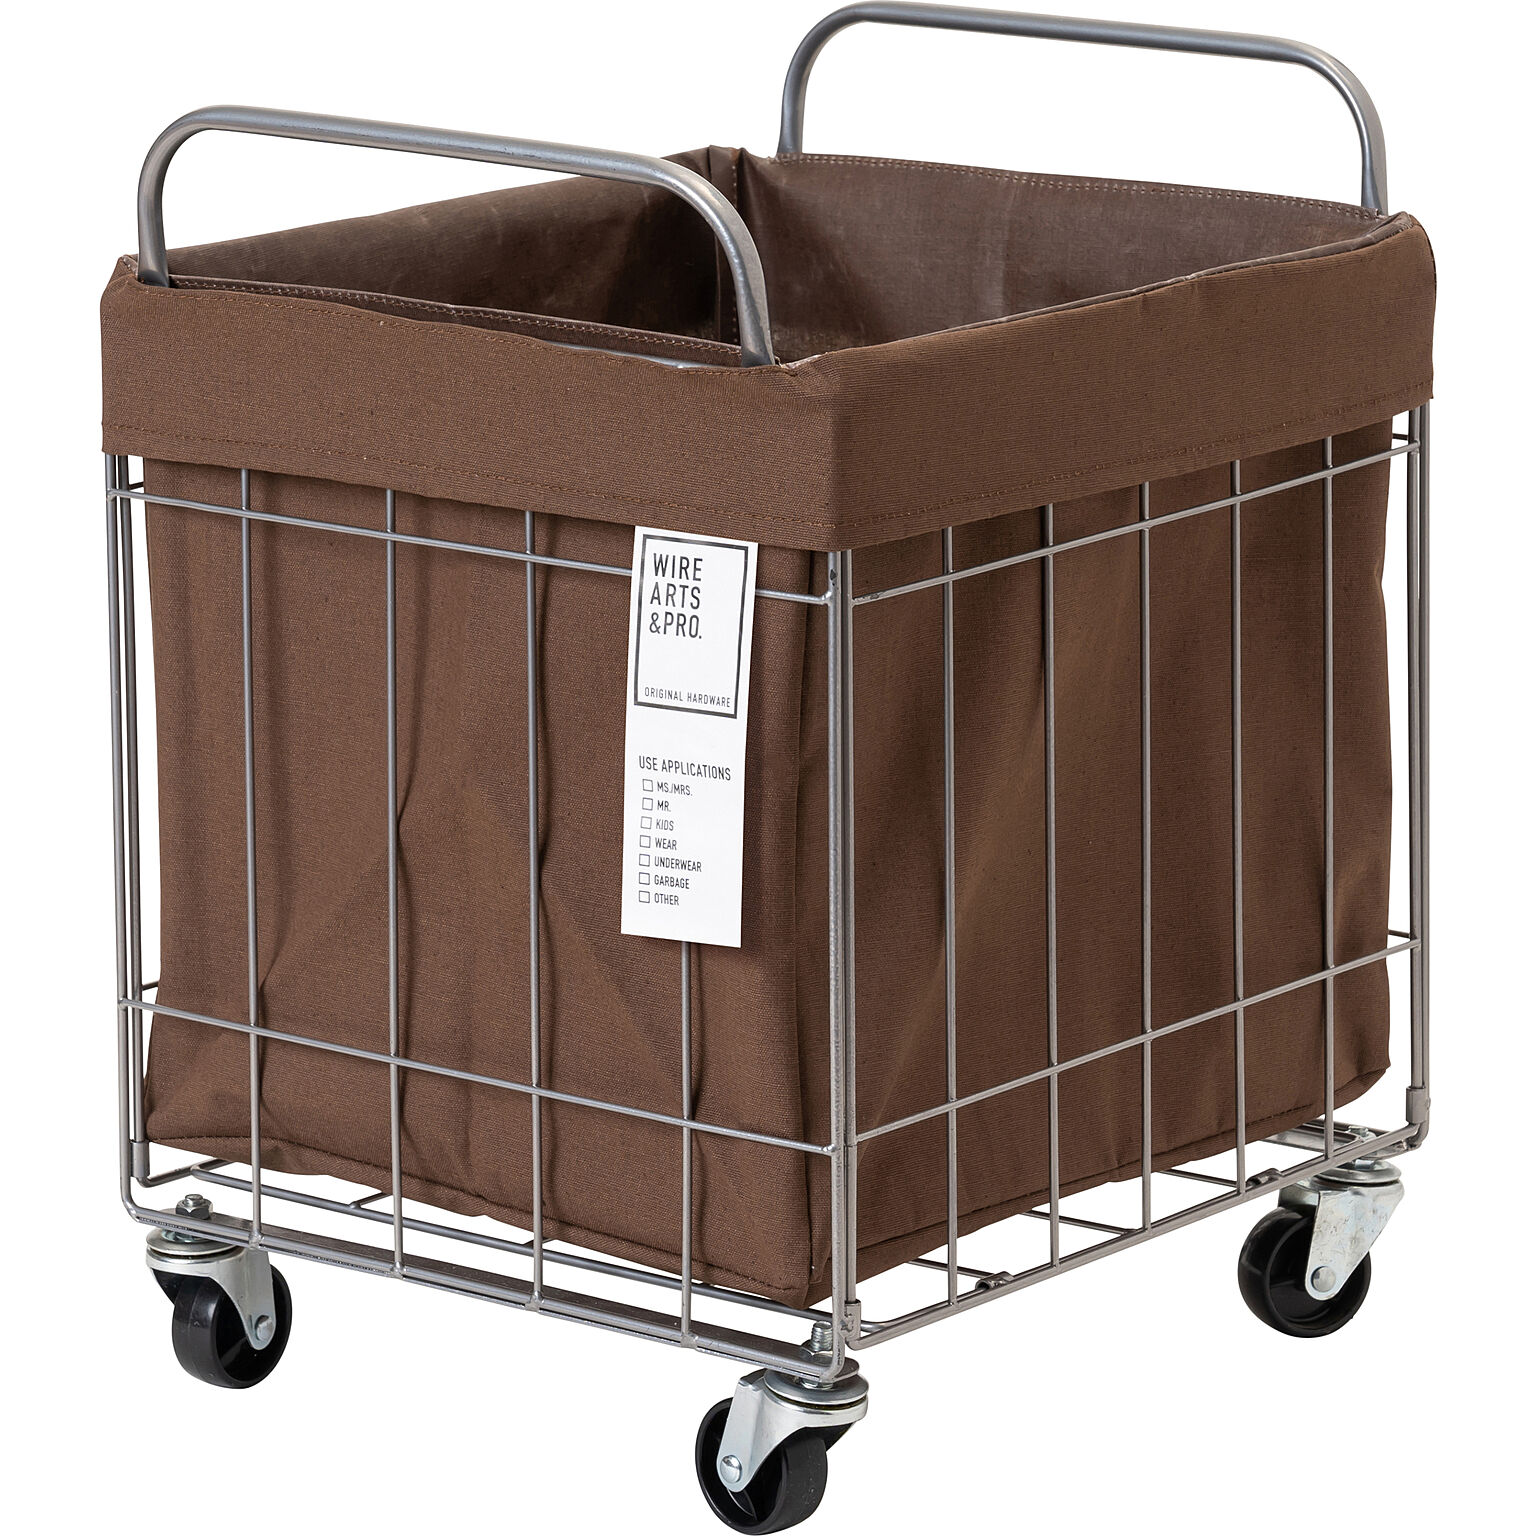 【BRID】FOLDING LAUNDRY SQUARE BASKET with CASTER 40L WIDE フォールディング ランドリー スクエアバスケット 40L WIDE